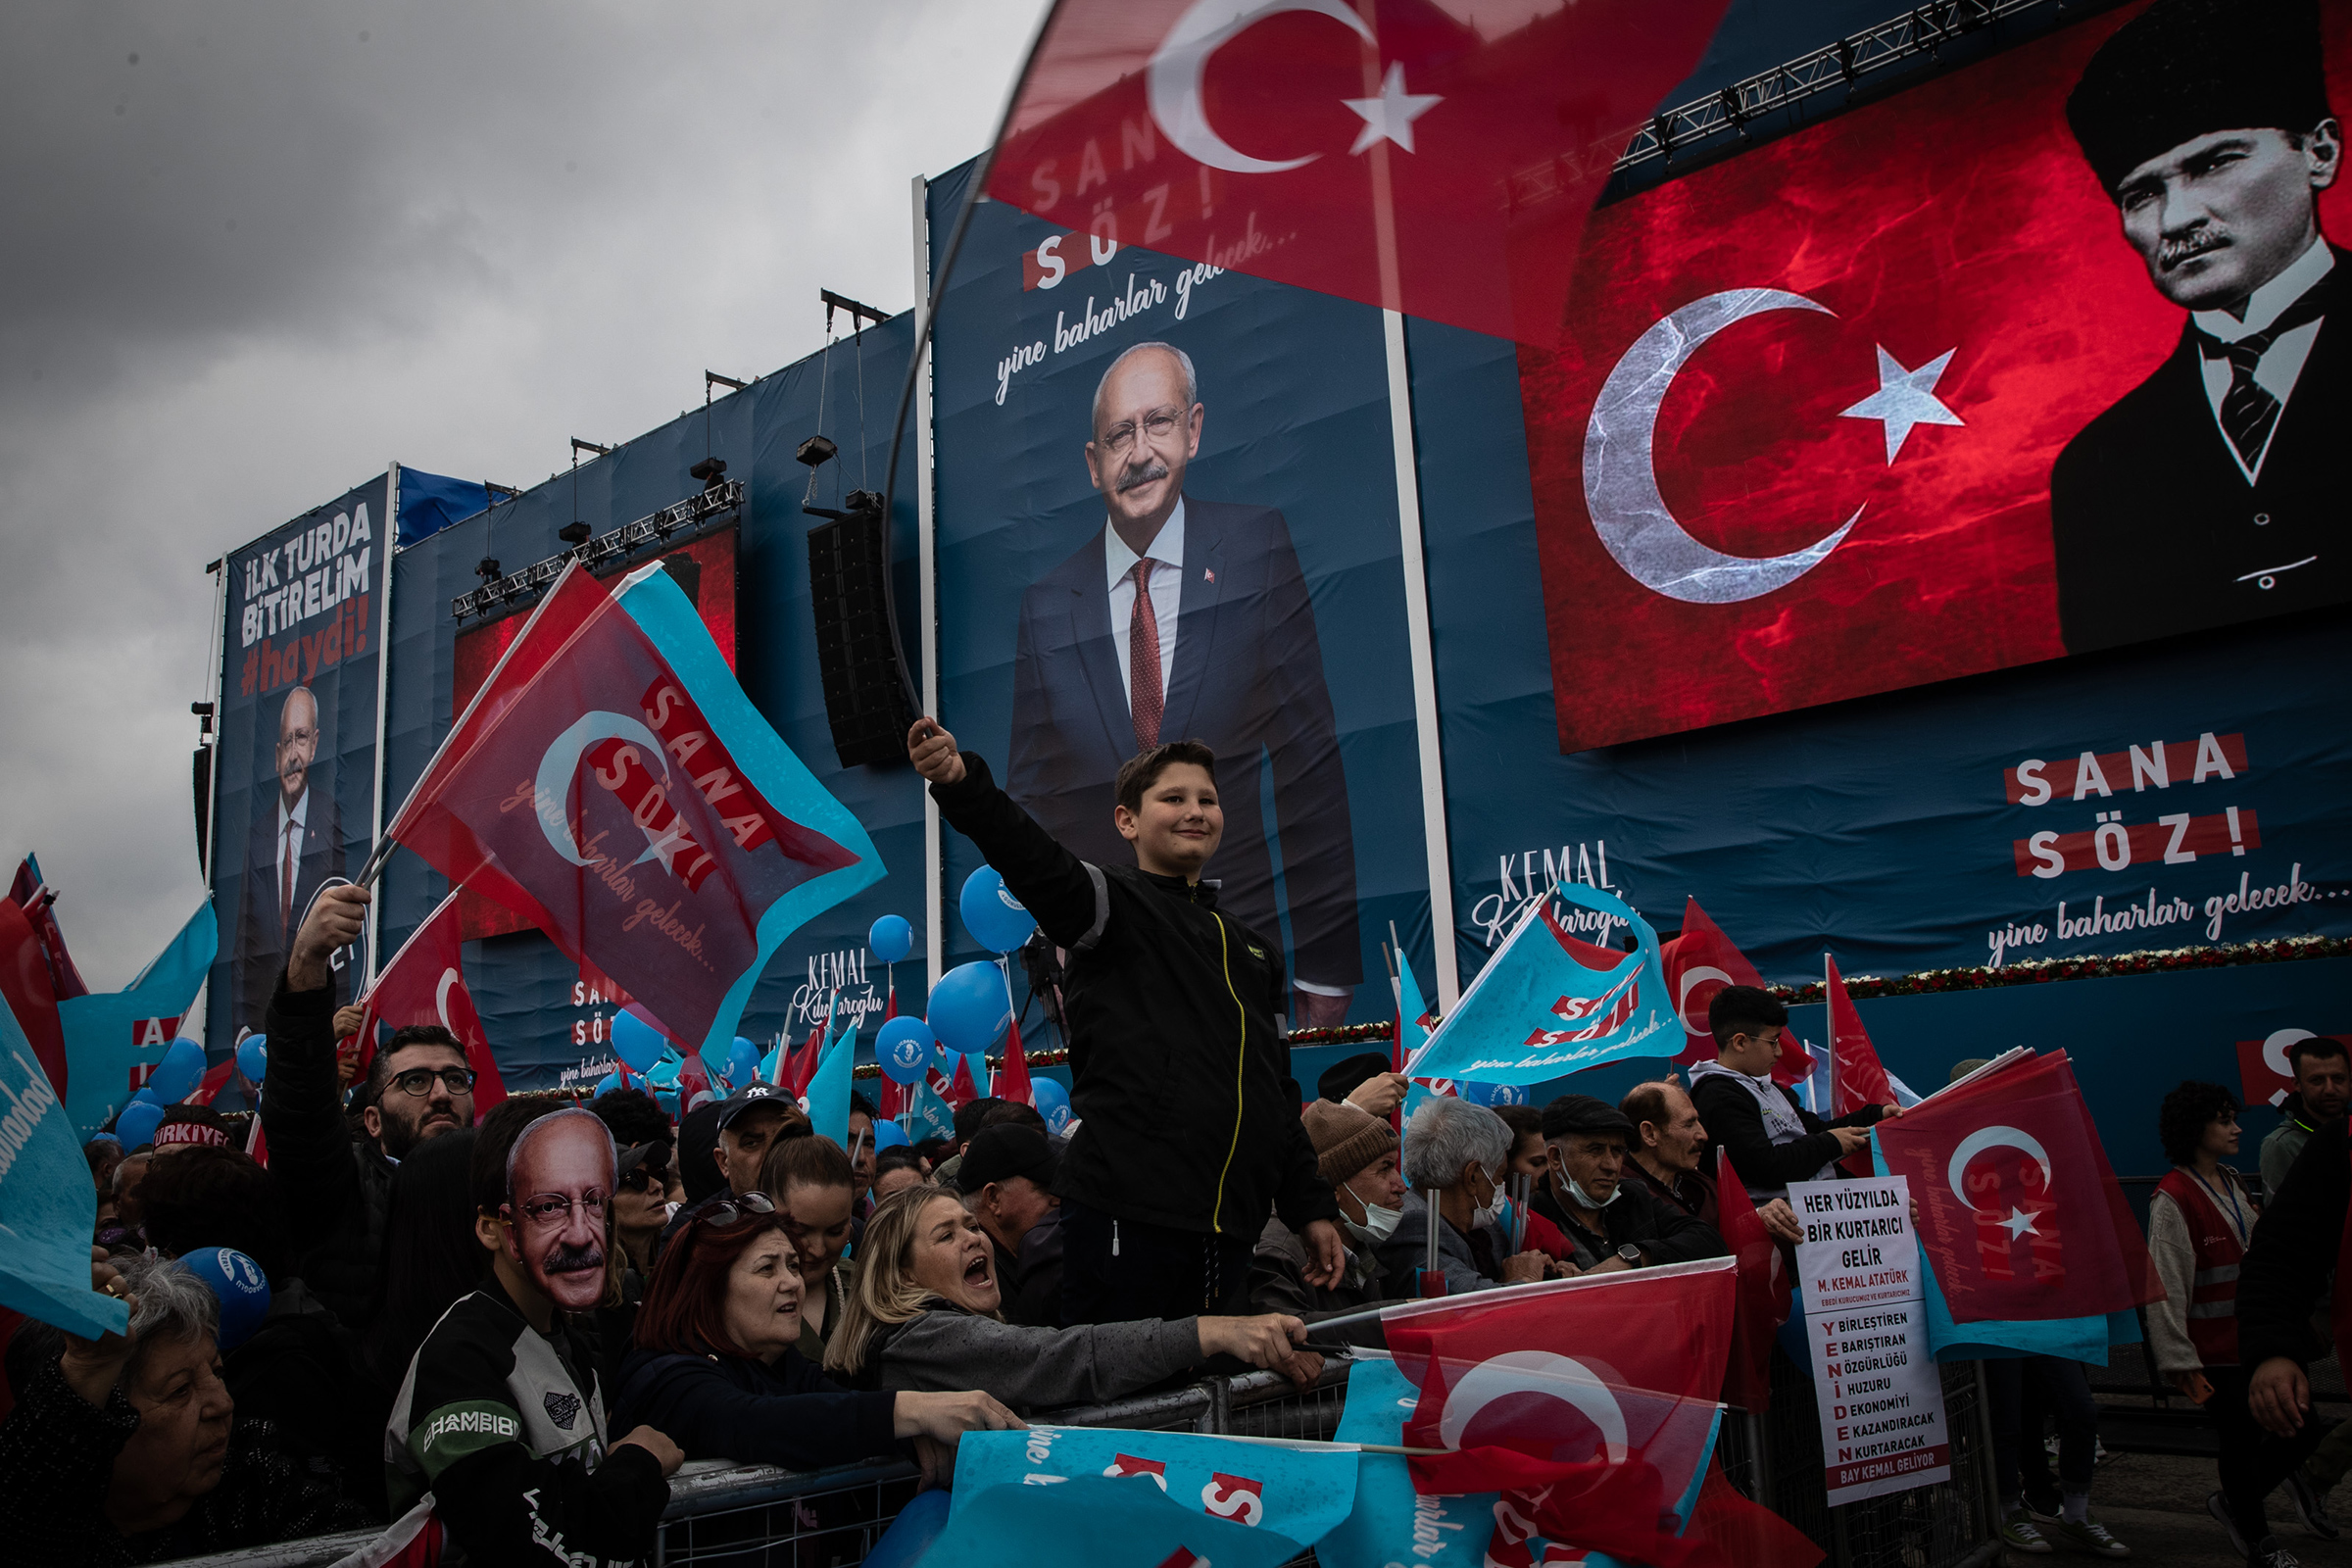 Supporters wave flags and chant slogans while waiting for the arrival of CHP Party presidential candidate Kemal Kılıçdaroğlu during a campaign rally on May 6 in Istanbul. (2023 Getty Images)